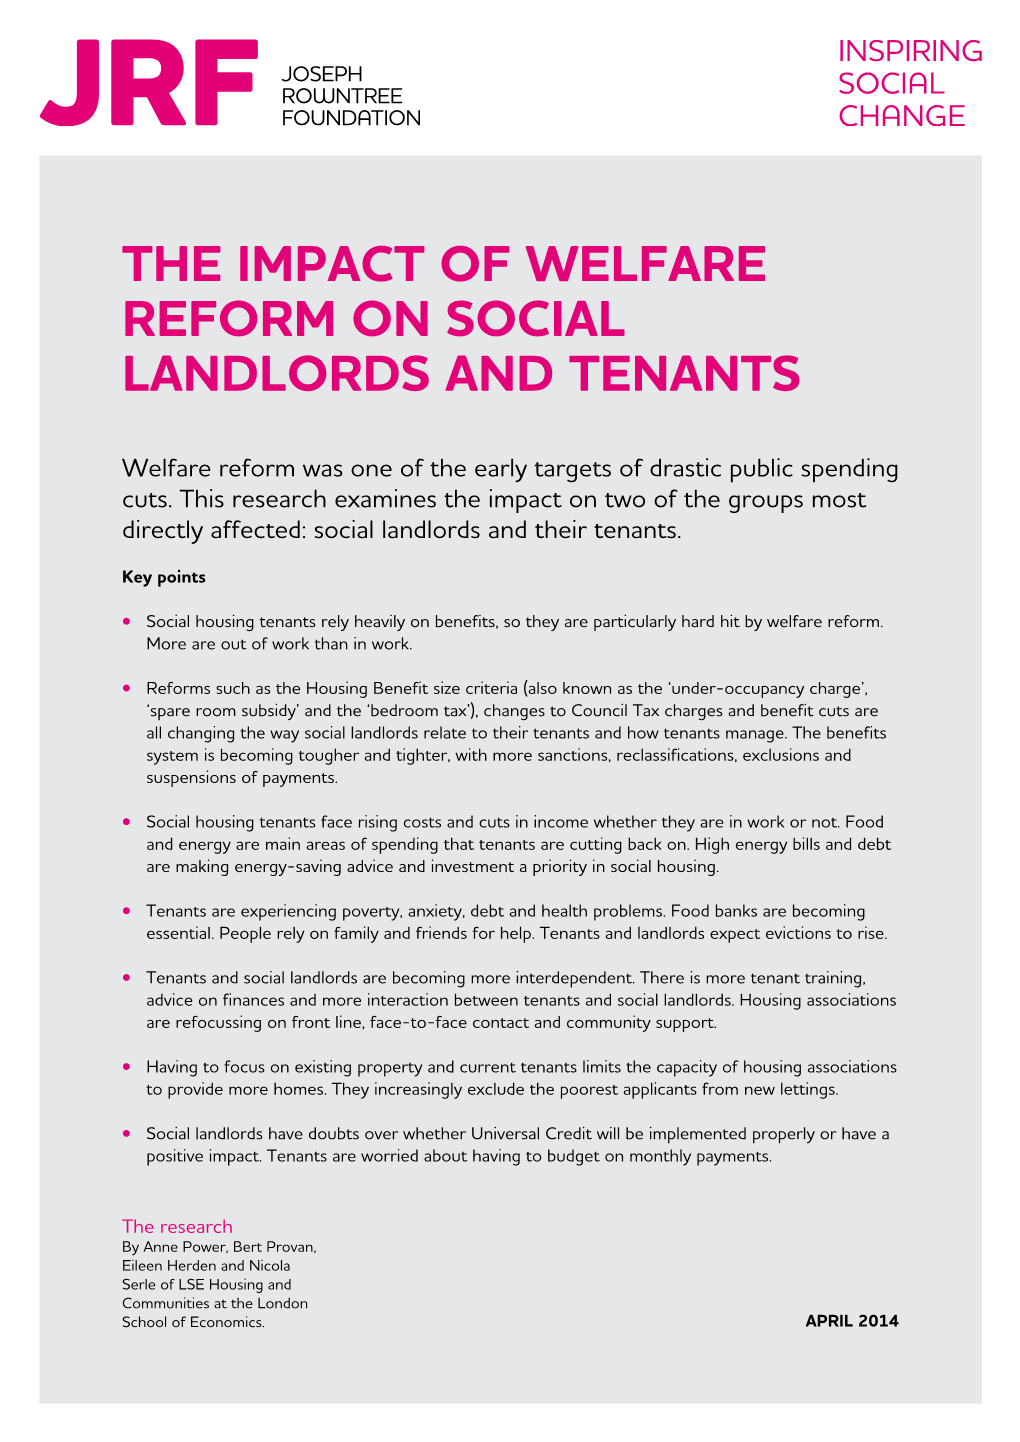 The Impact of Welfare Reform on Social Landlords and Tenants